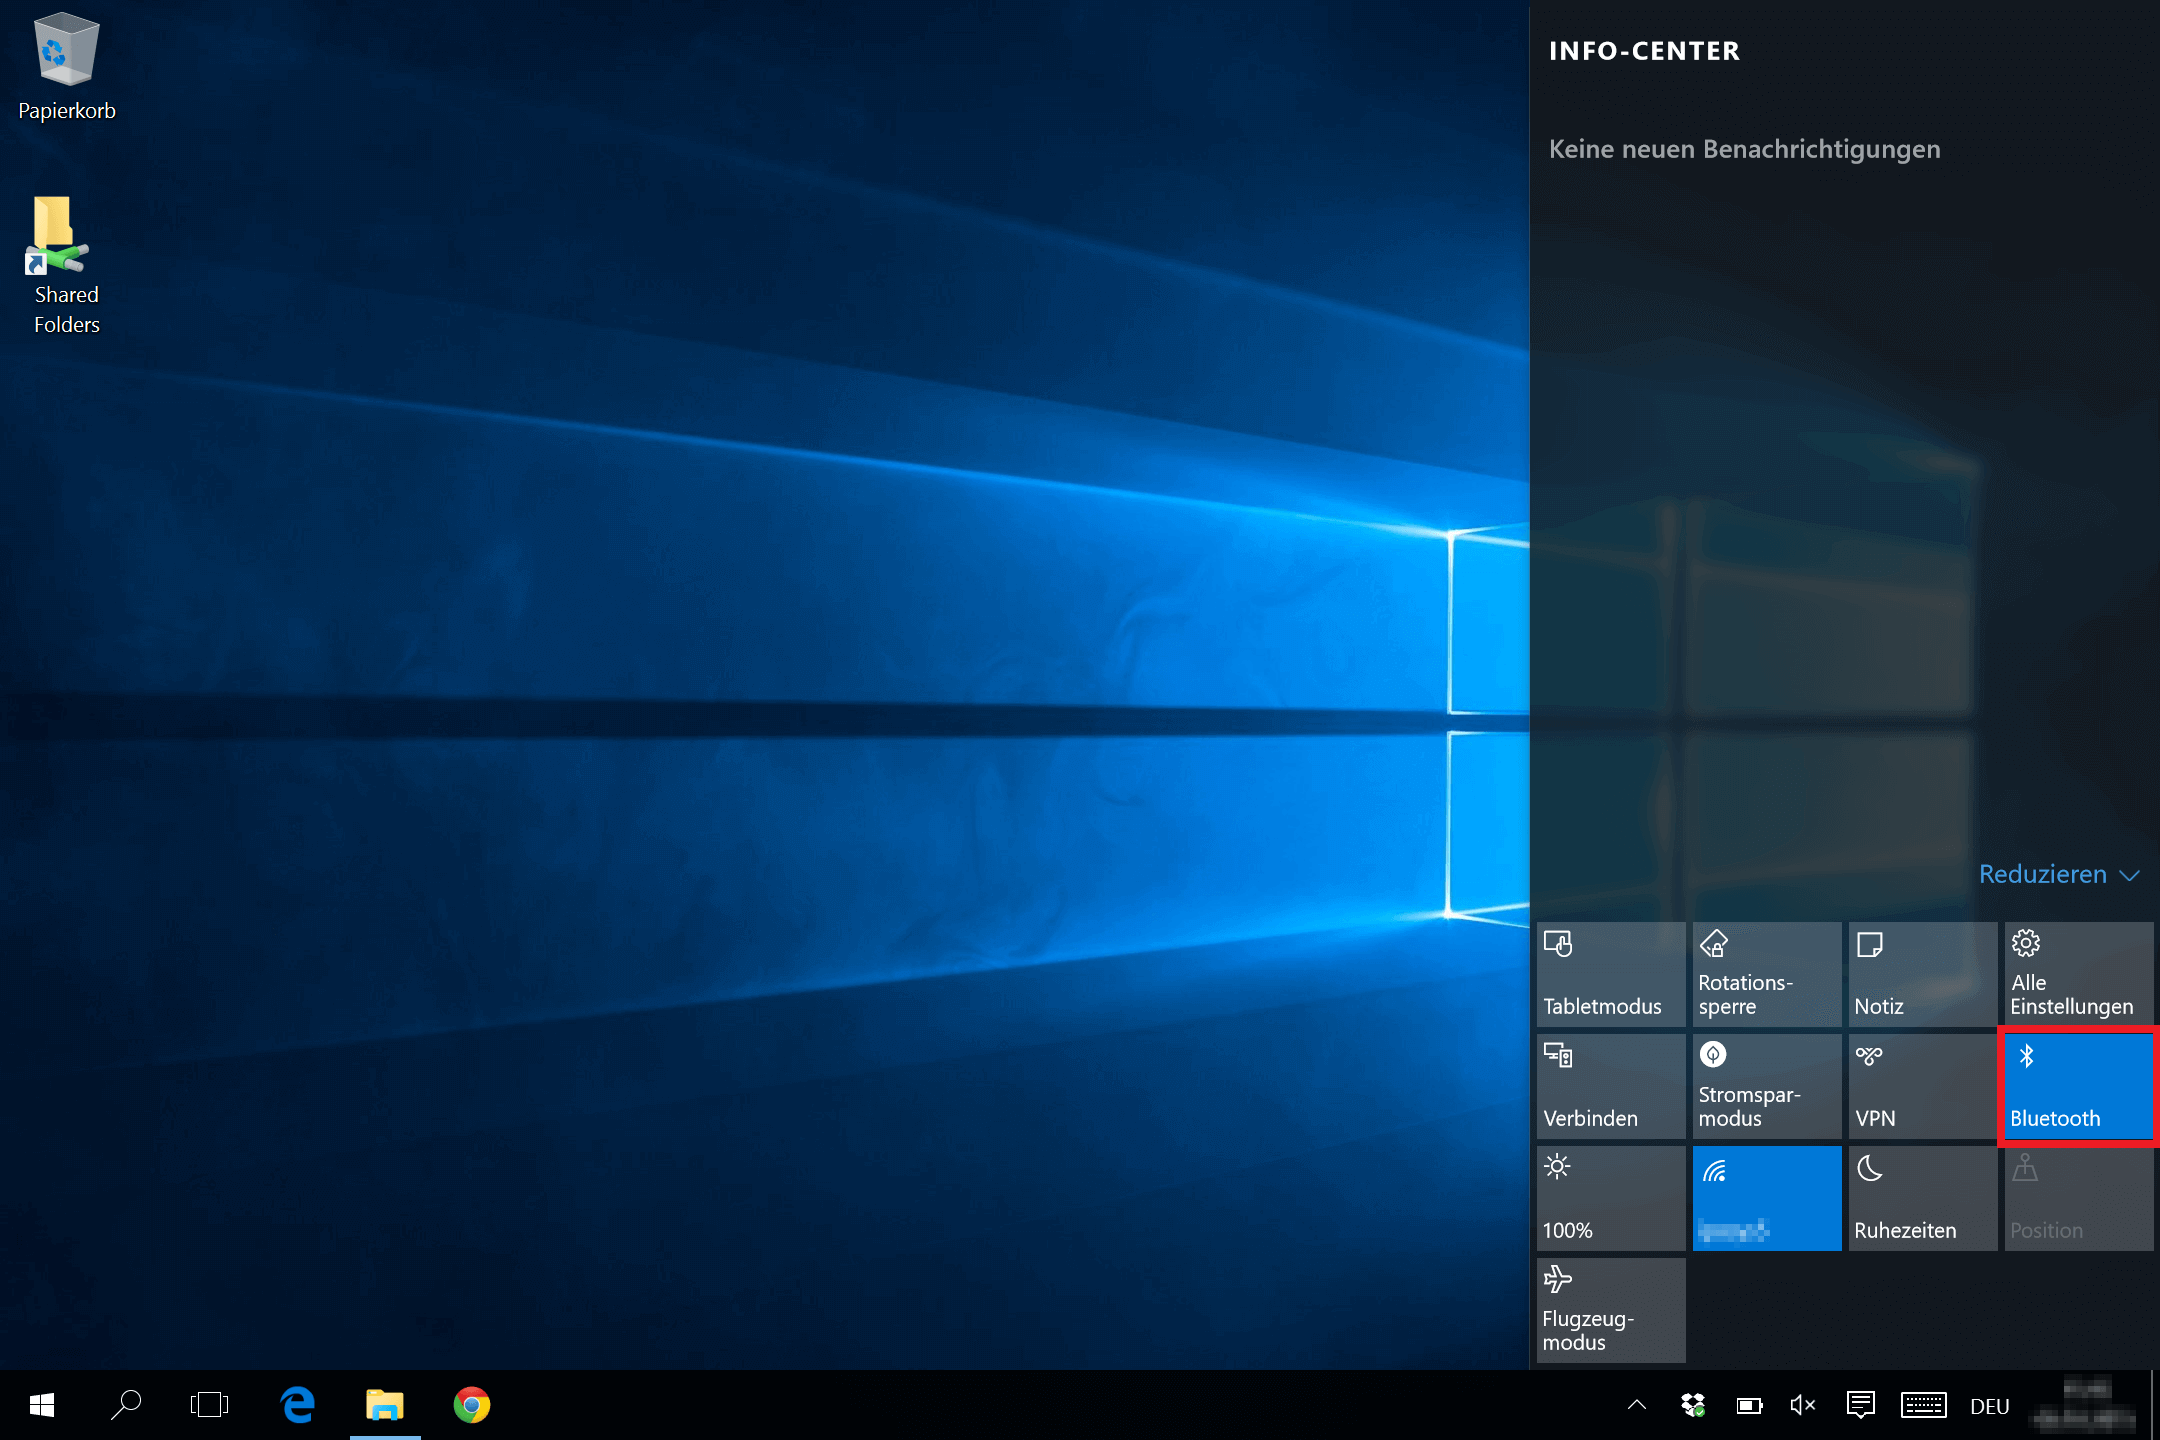 How to turn on Bluetooth on Windows 10 Info Center with one click